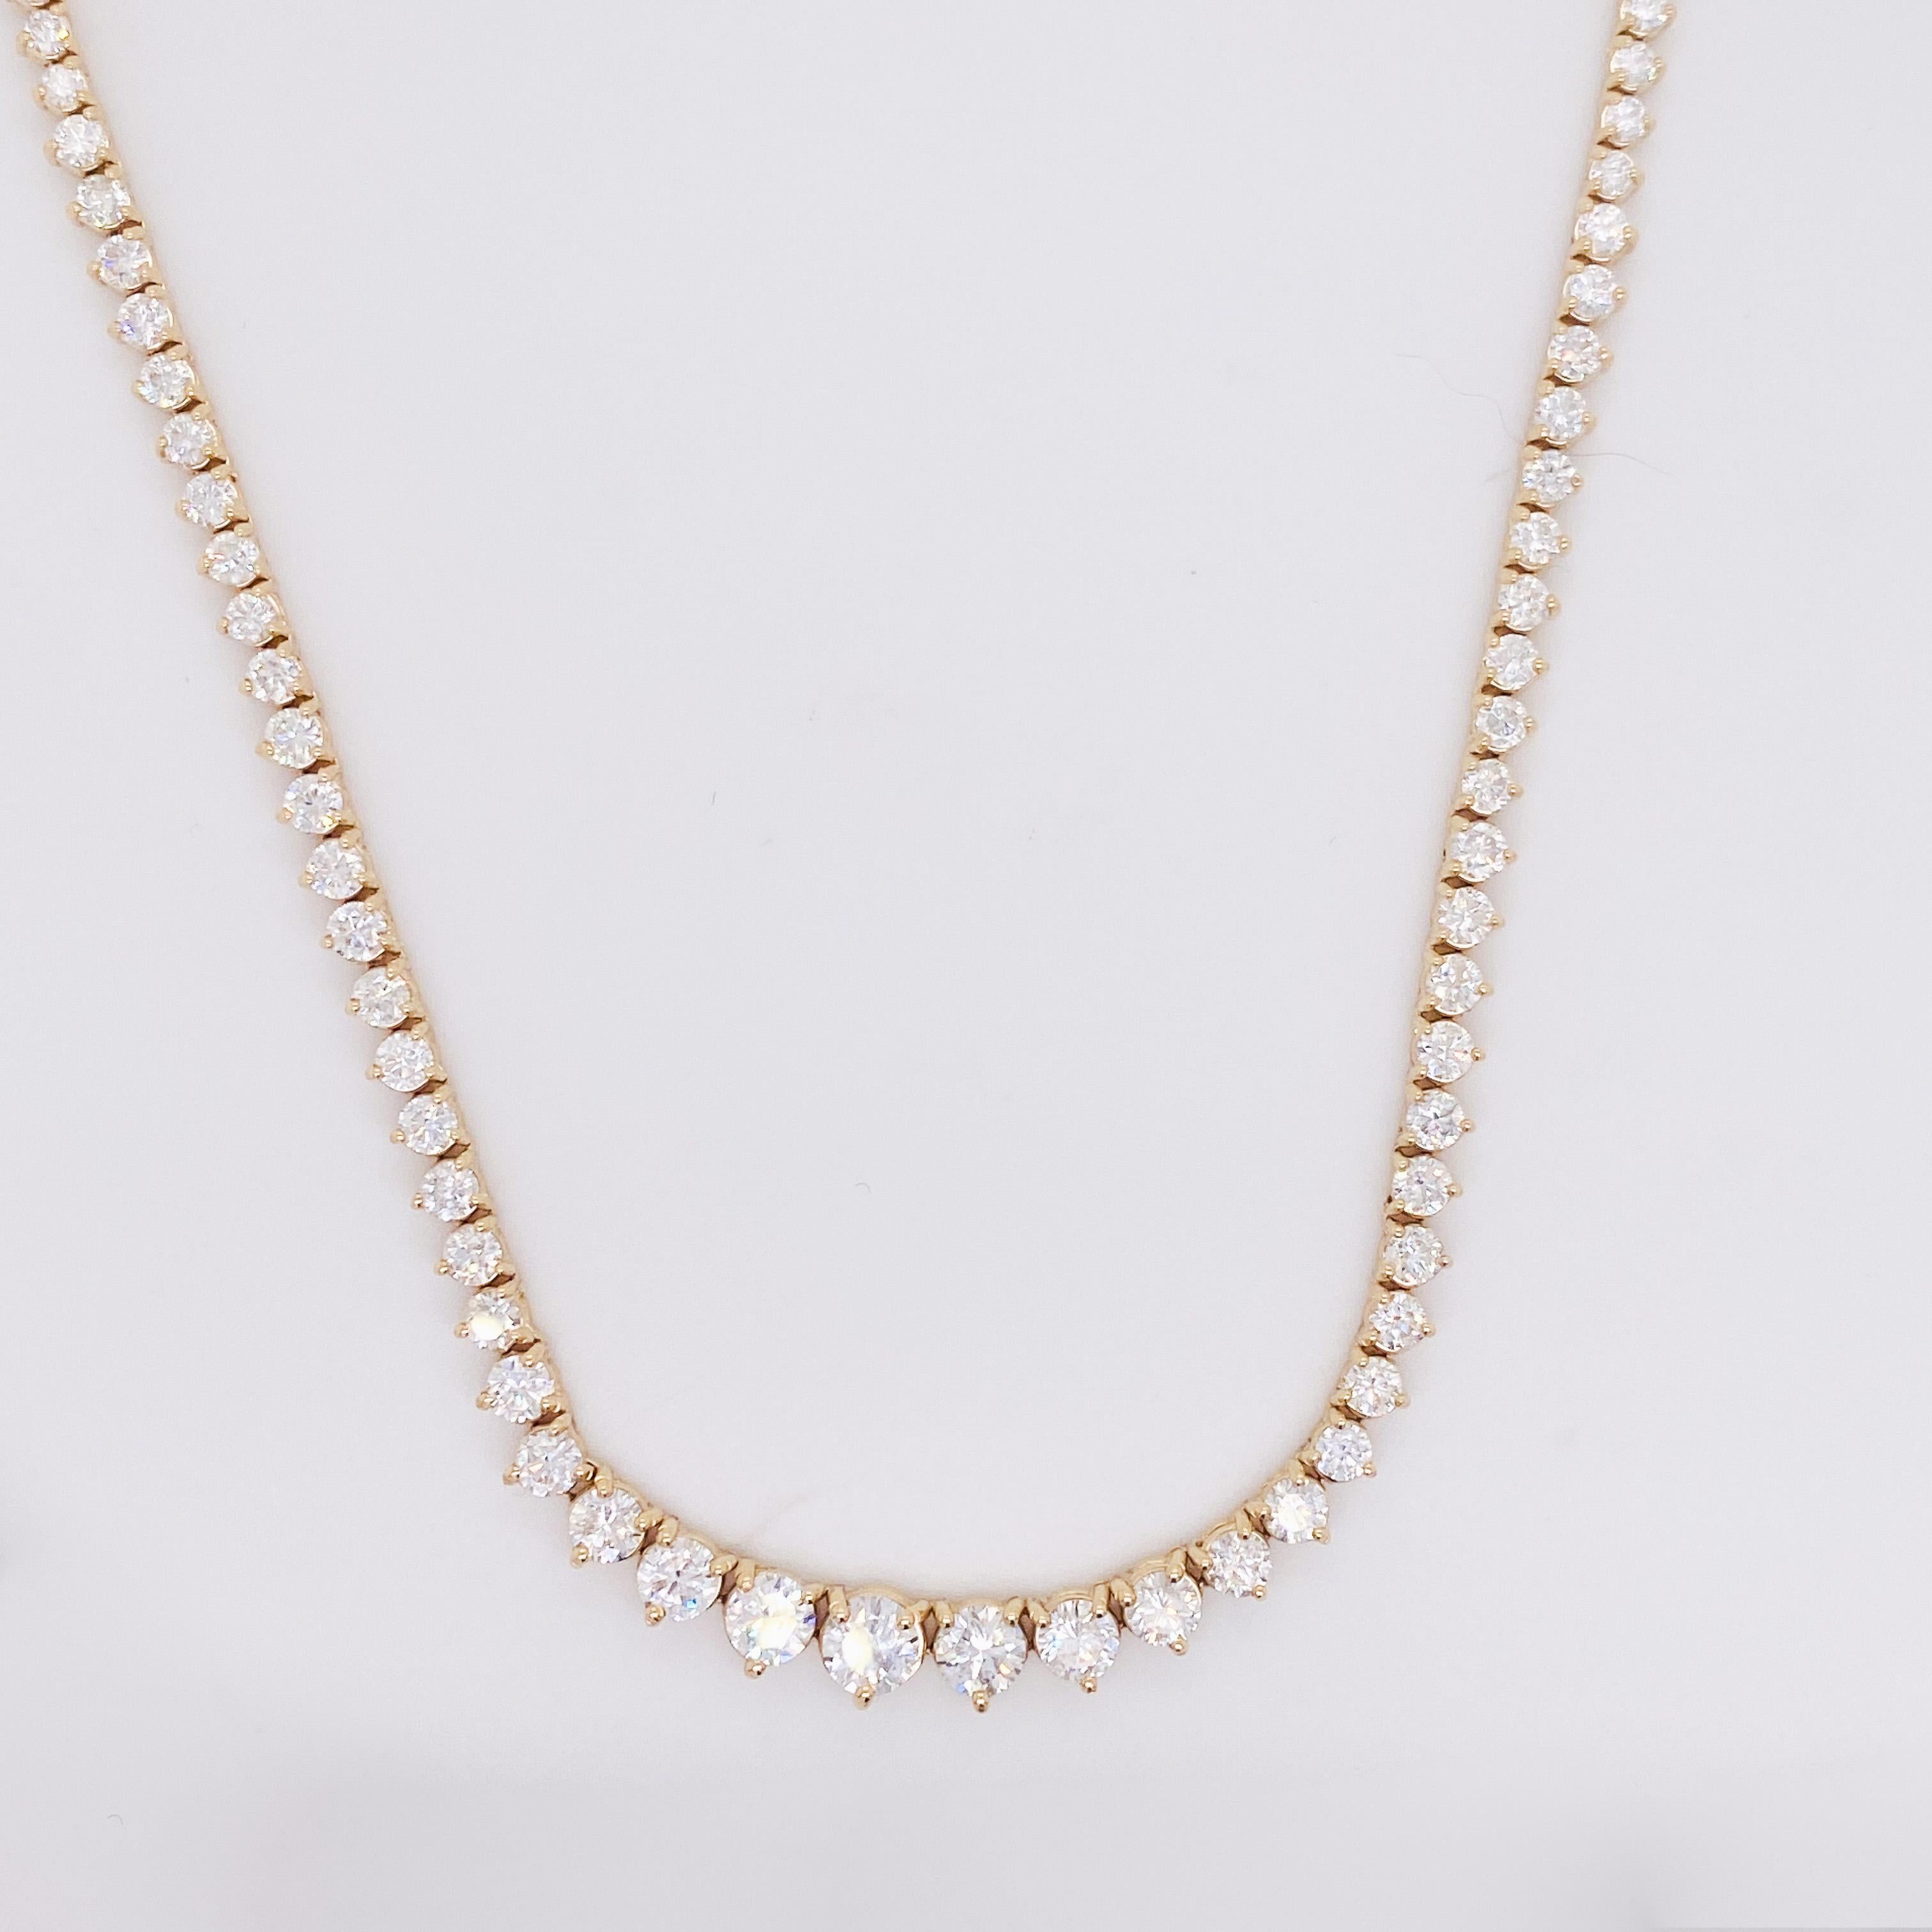 This beautiful Riviera graduated diamond tennis necklace adds grace and flair to your everyday look! The diamonds weigh a total of 10.00 carats and have SI clarity with G-H color. Each diamond is set with three prongs and sparkles brilliantly! The